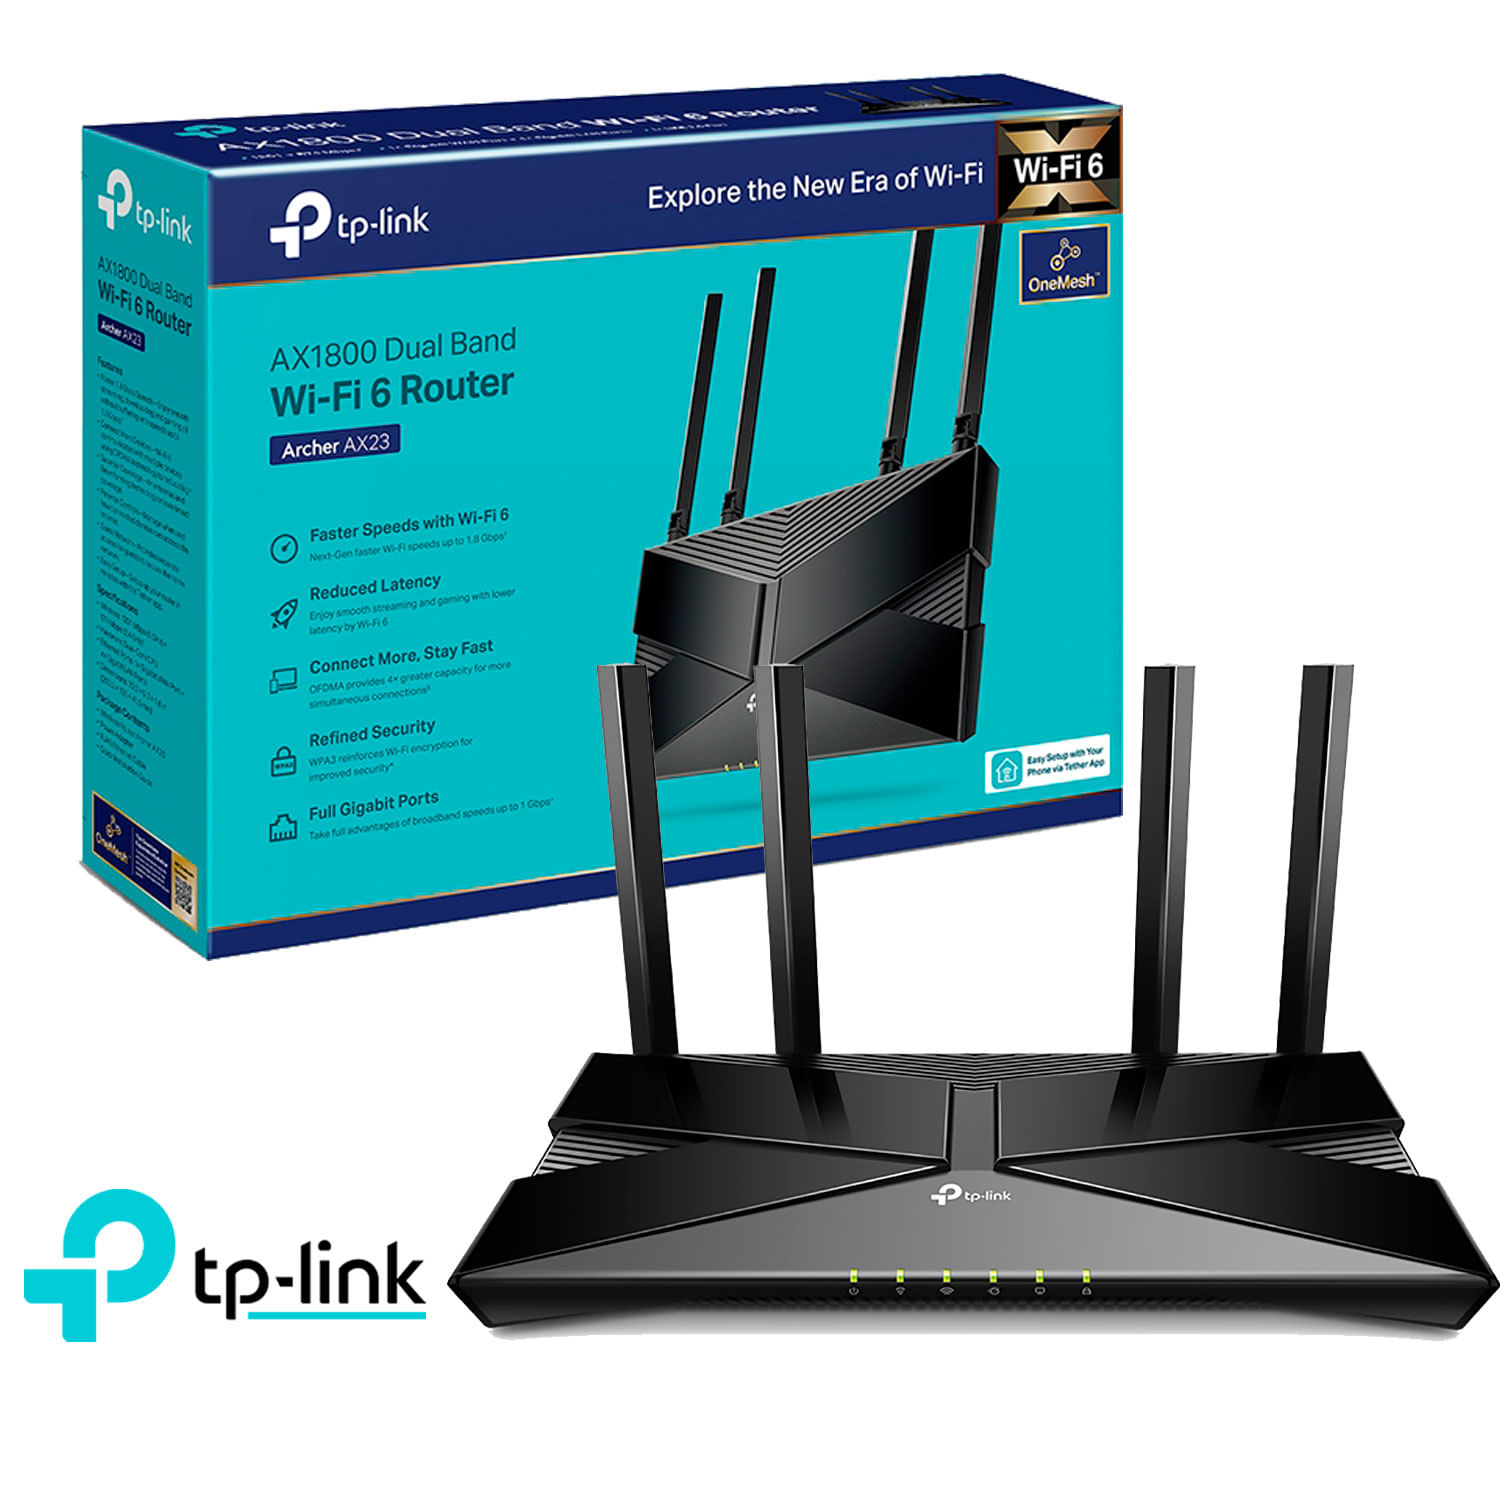 TP Link Archer AX23 WiFi 6 Router Dual Band AX1800